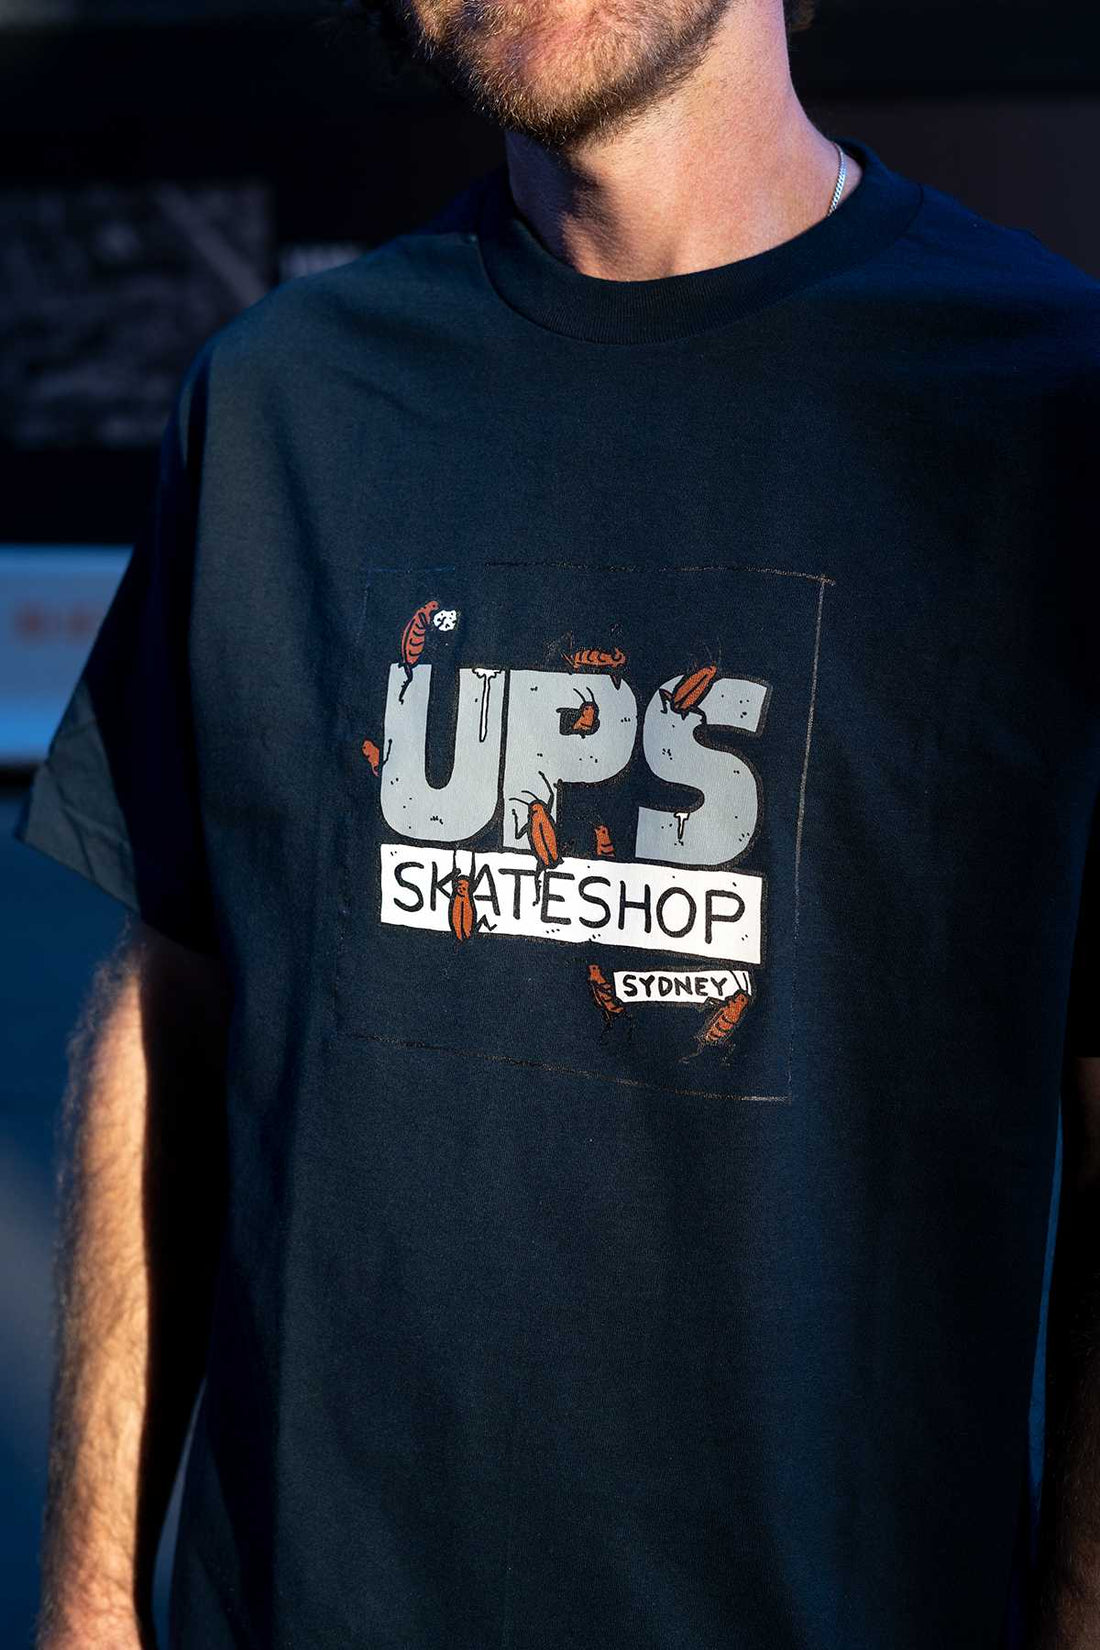 U.P.S. and todd francis cockroach tee